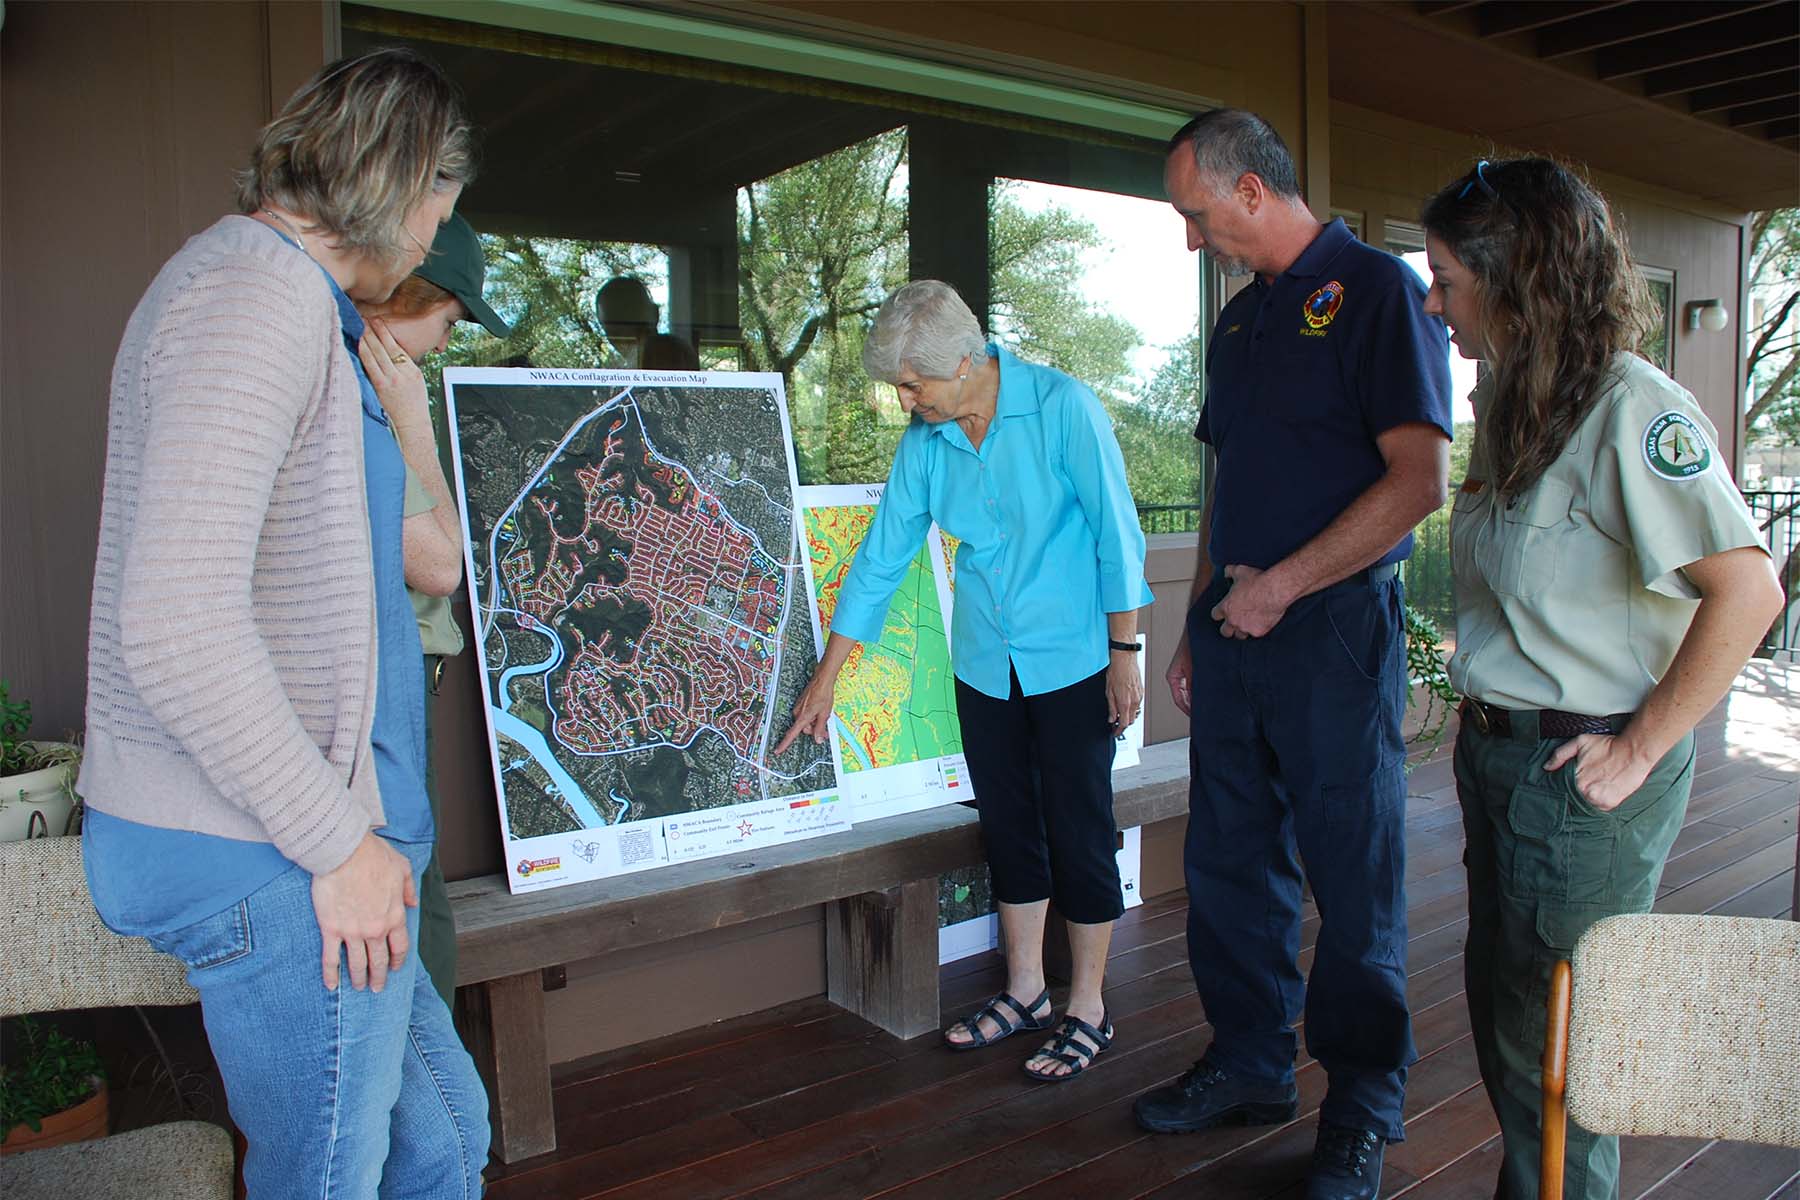 local residents and fire service personnel looking at a map